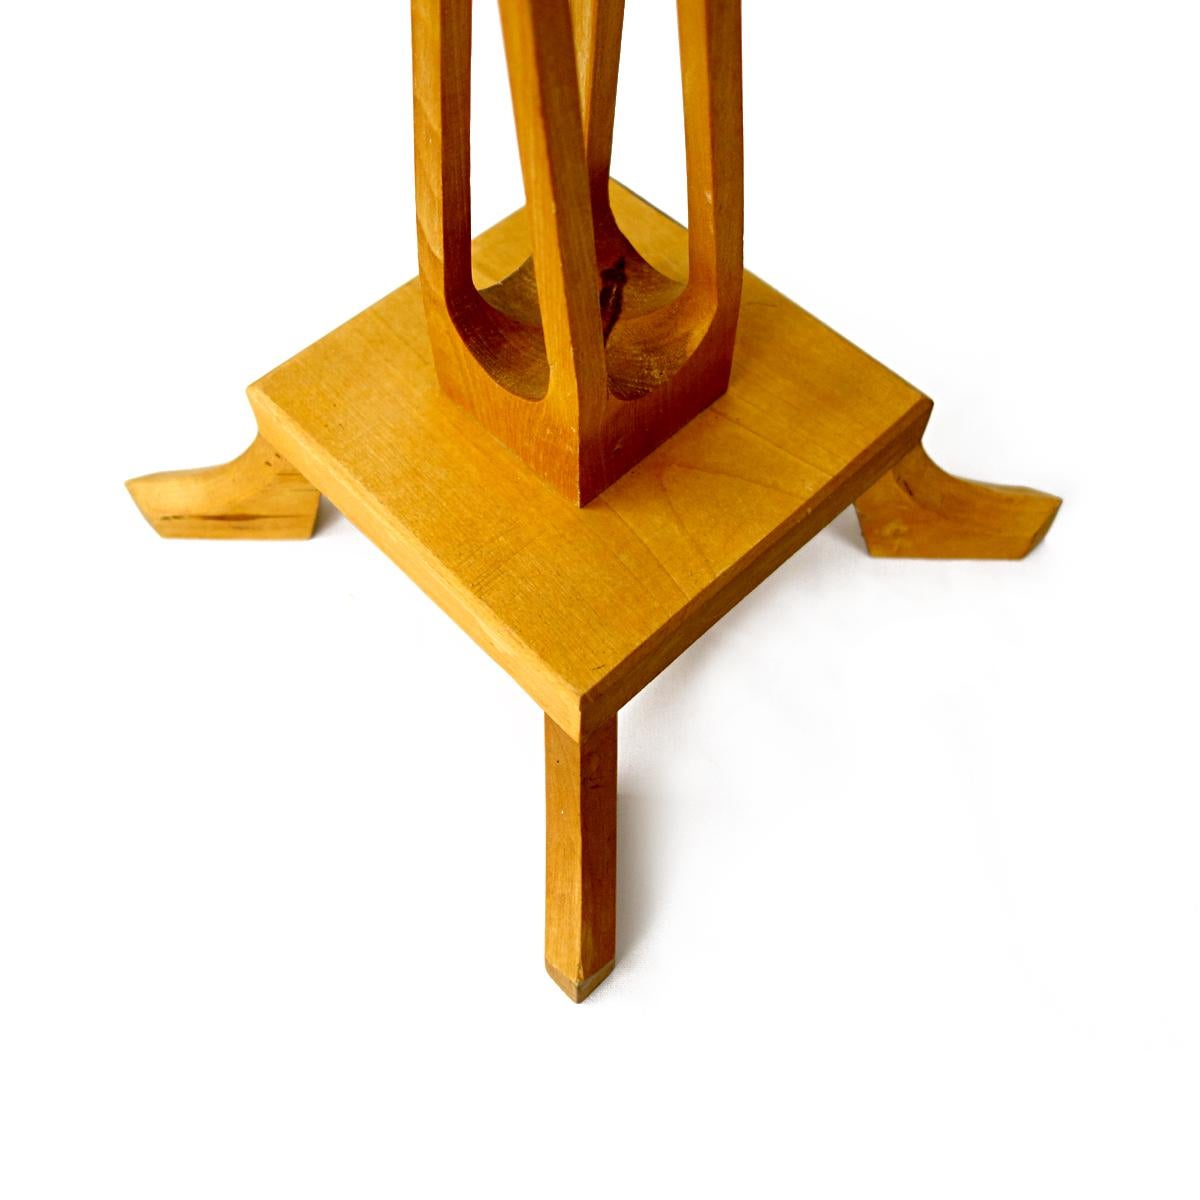 Mid-20th Century Very Rare Pair of High Mid-Century Wooden Candlesticks by Selma Helmer Loberg For Sale